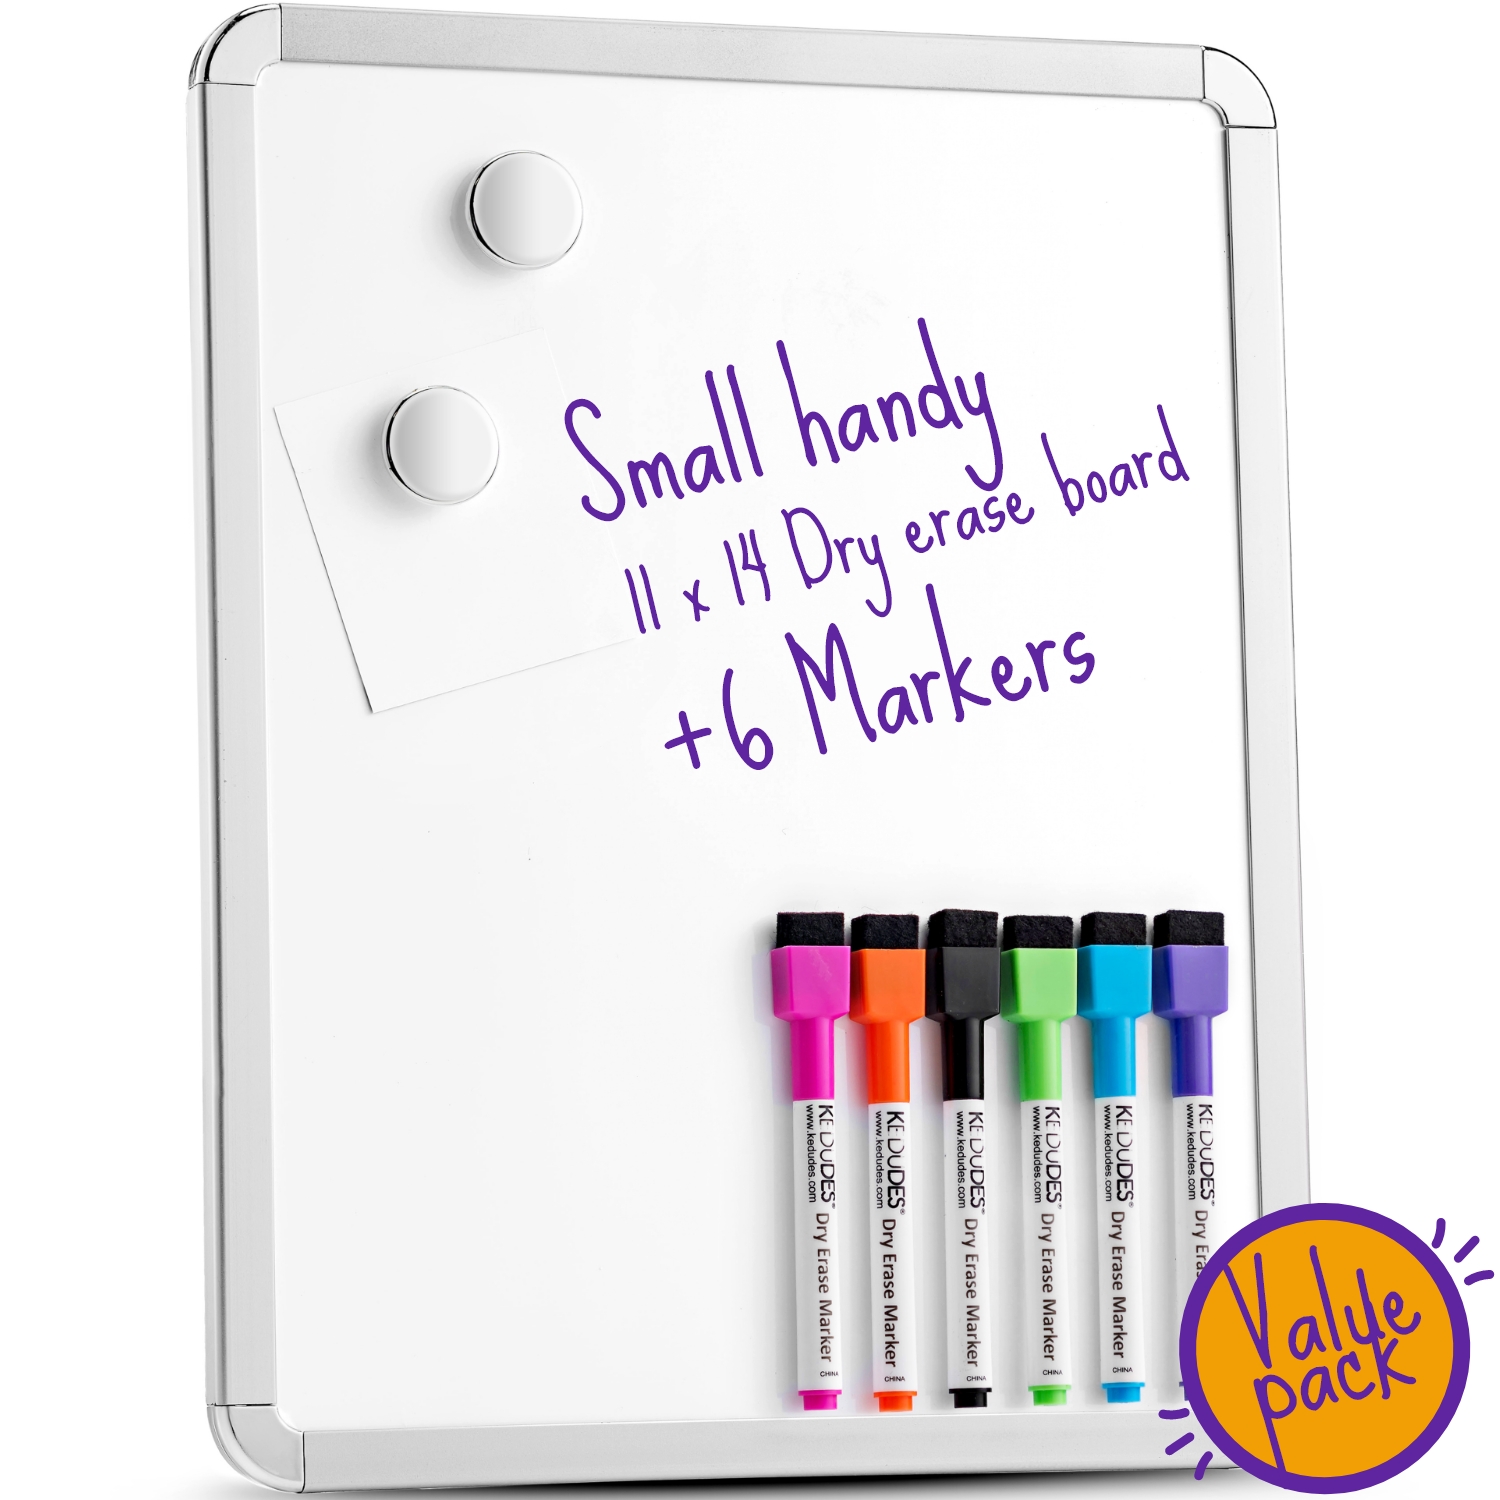 Kedudes Magnetic Dry Erase White board 11 x 14 with frame. Includes 6  Magnetic Dry Erase Markers, Assorted Colors. Great For Fridge